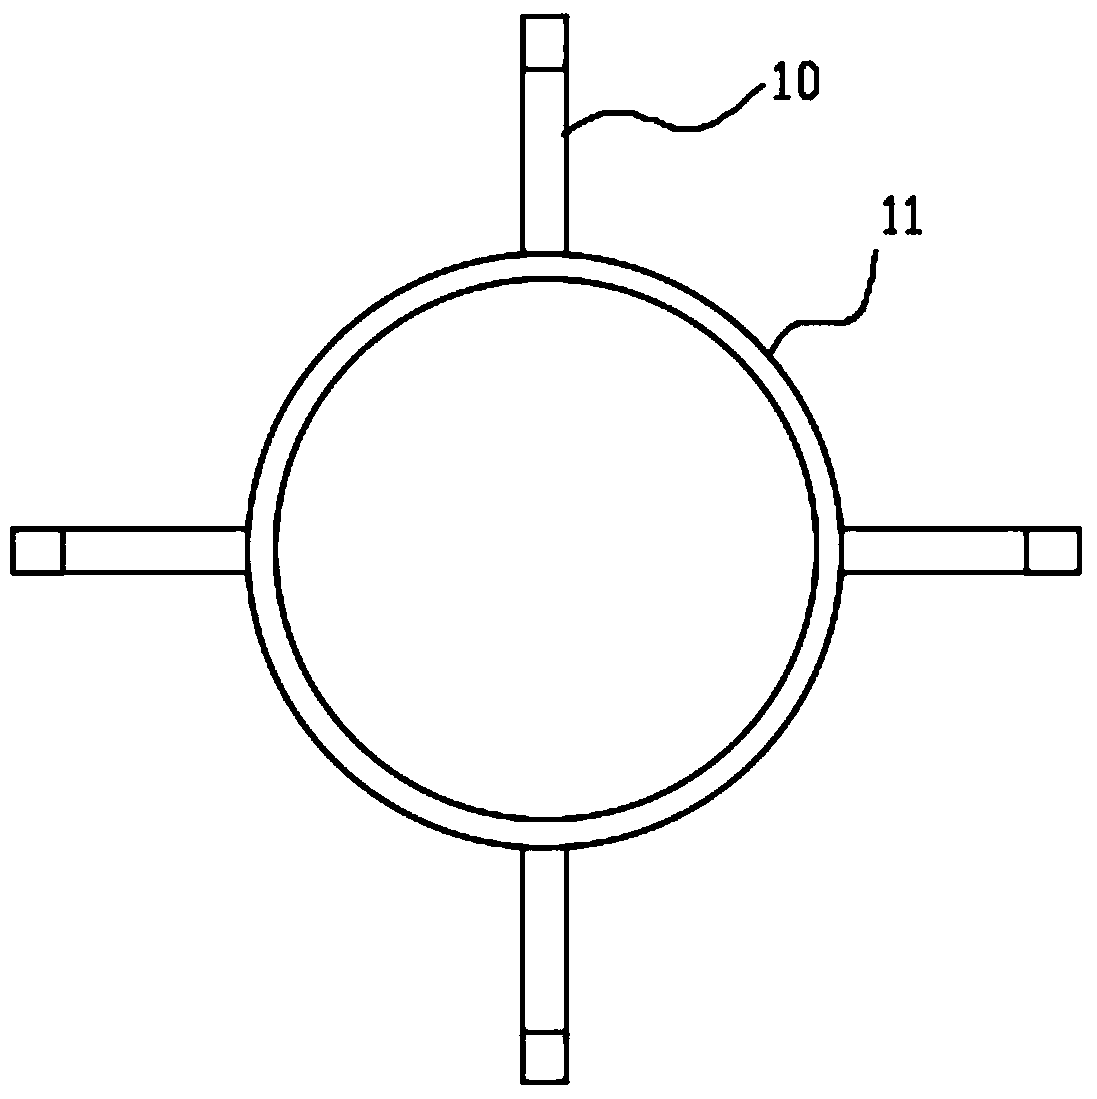 Anti-drop manhole cover device for automatically adjusting drainage